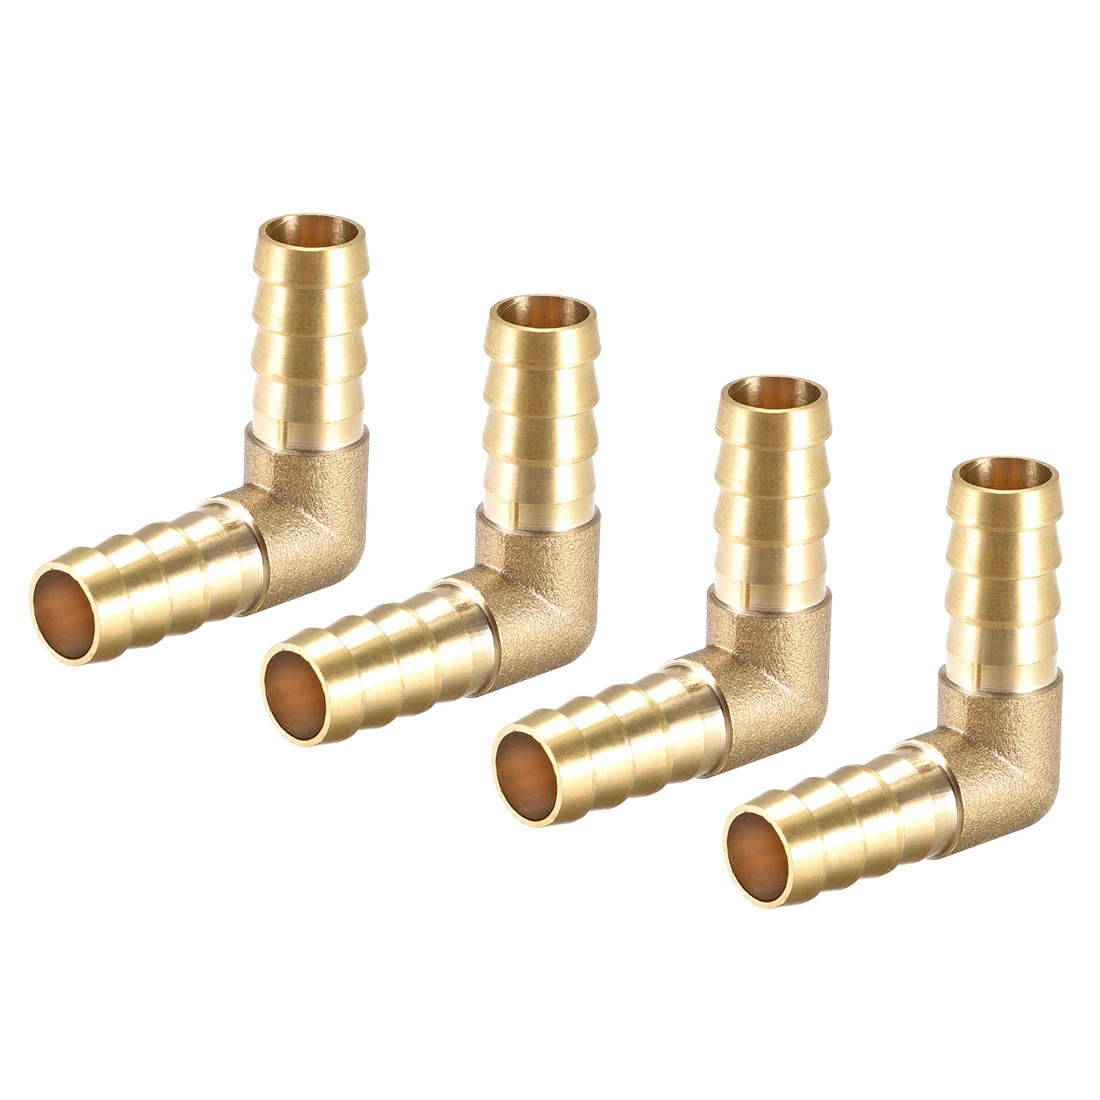 

uxcell 4pcs 12mm Barb Brass Hose Fitting 90 Degree Elbow Pipe Coupler Tubing Adapter for air, water, fuel, oil Gold Tone